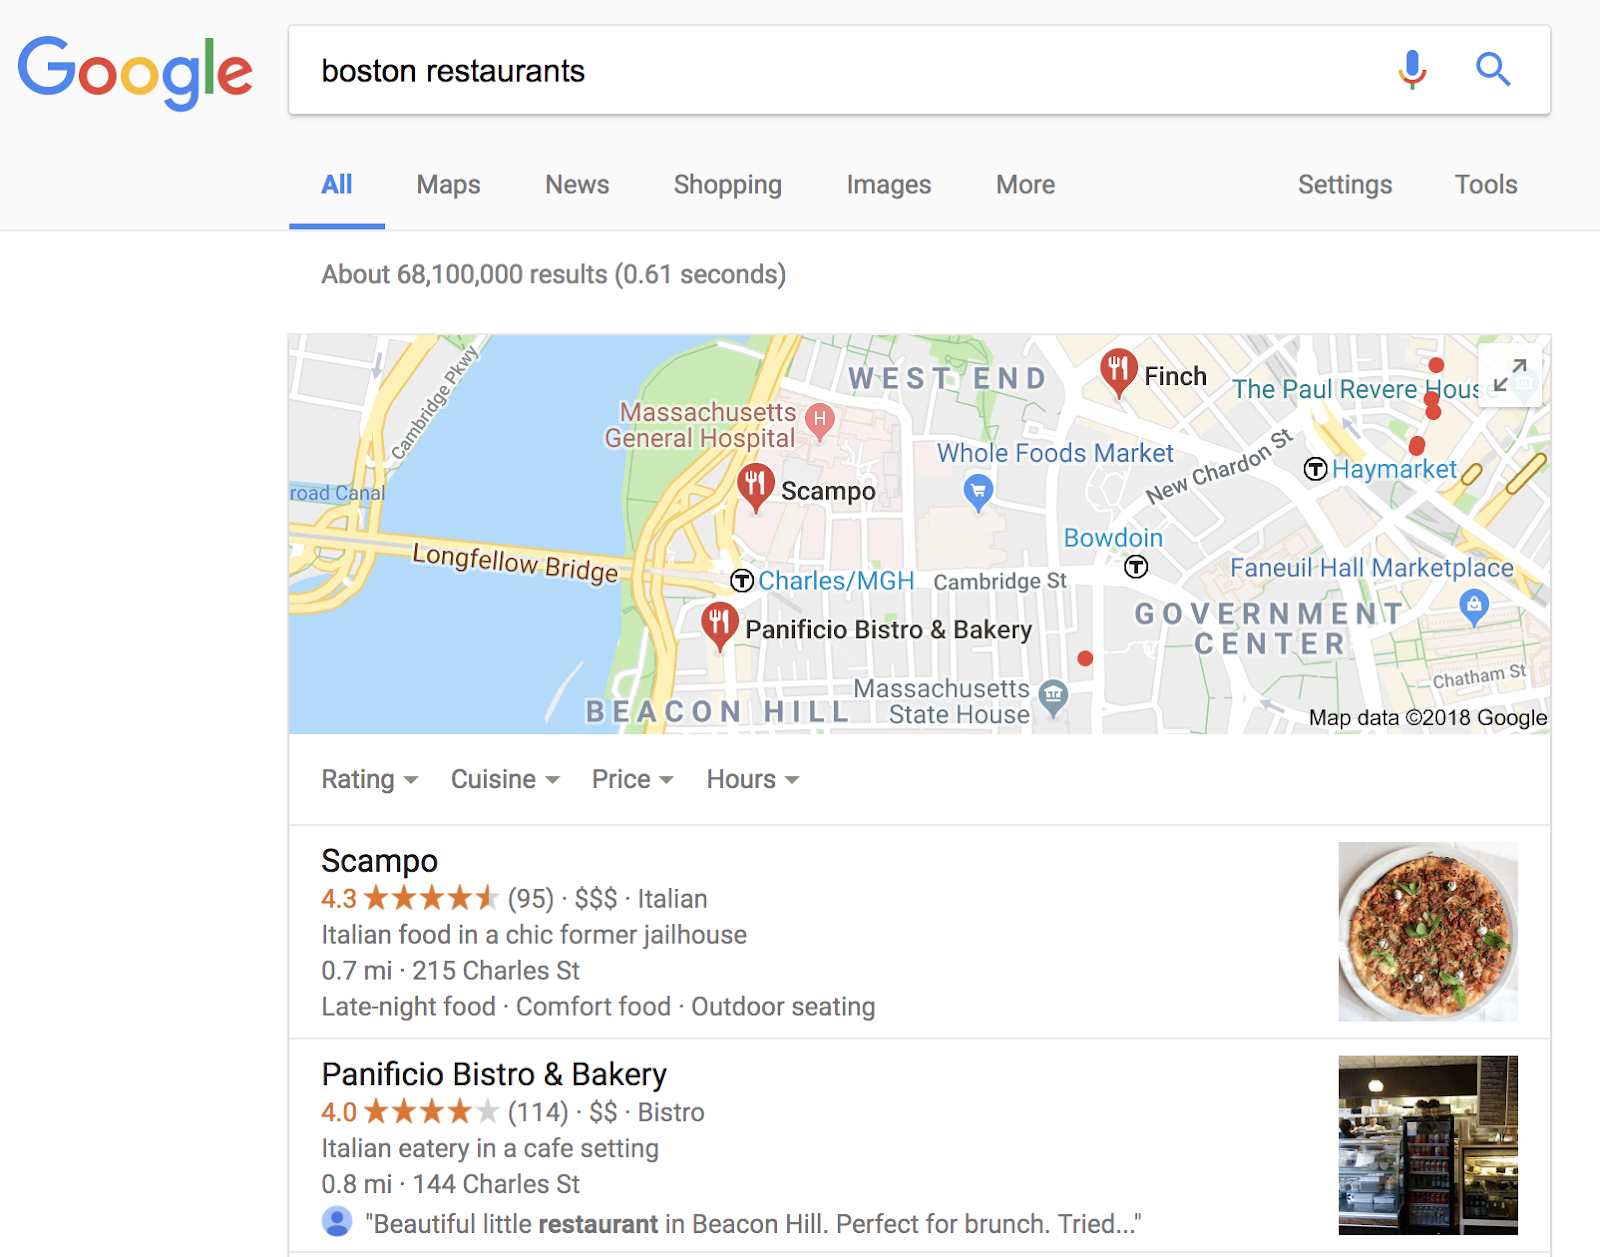 Google Maps results with location search for Boston restaurants